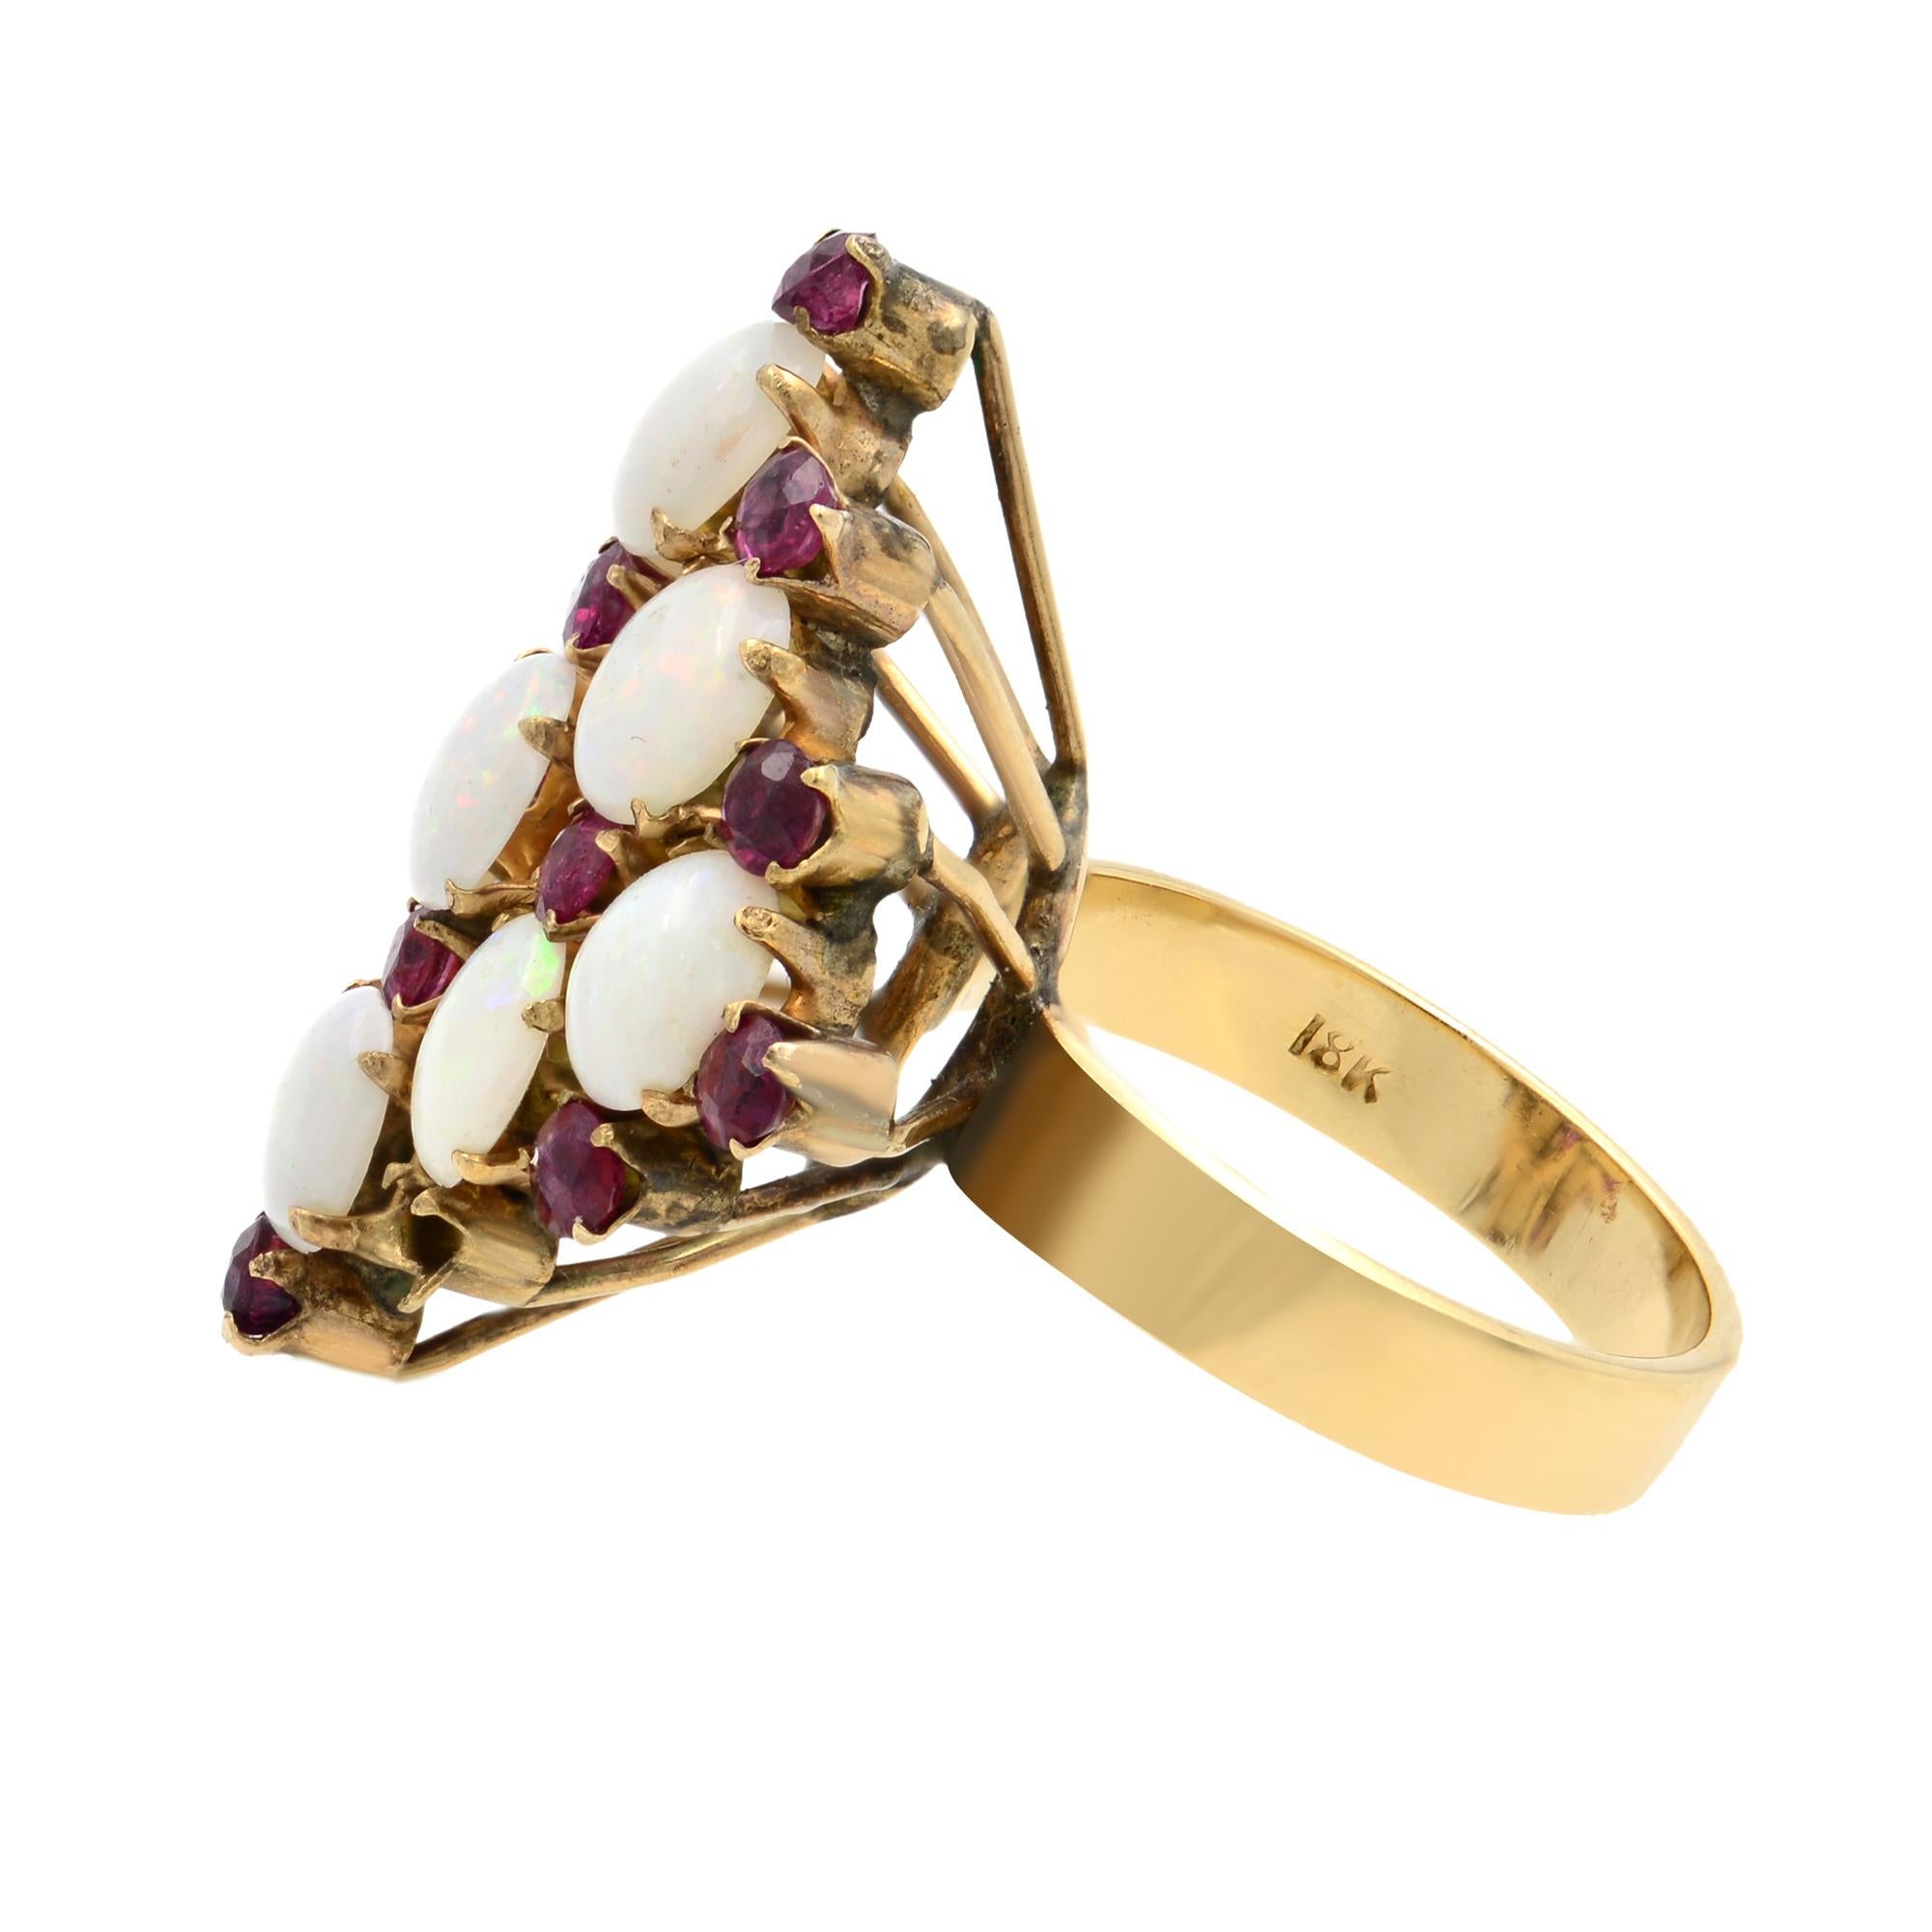 This Vintage Estate ring is crafted in 18k yellow gold. It features prong set oval shaped Opal and round cut Rubies. Ring size: 5.75. Total weight: 5.85 grams. Great pre-owned condition. Comes with a presentable gift box.
